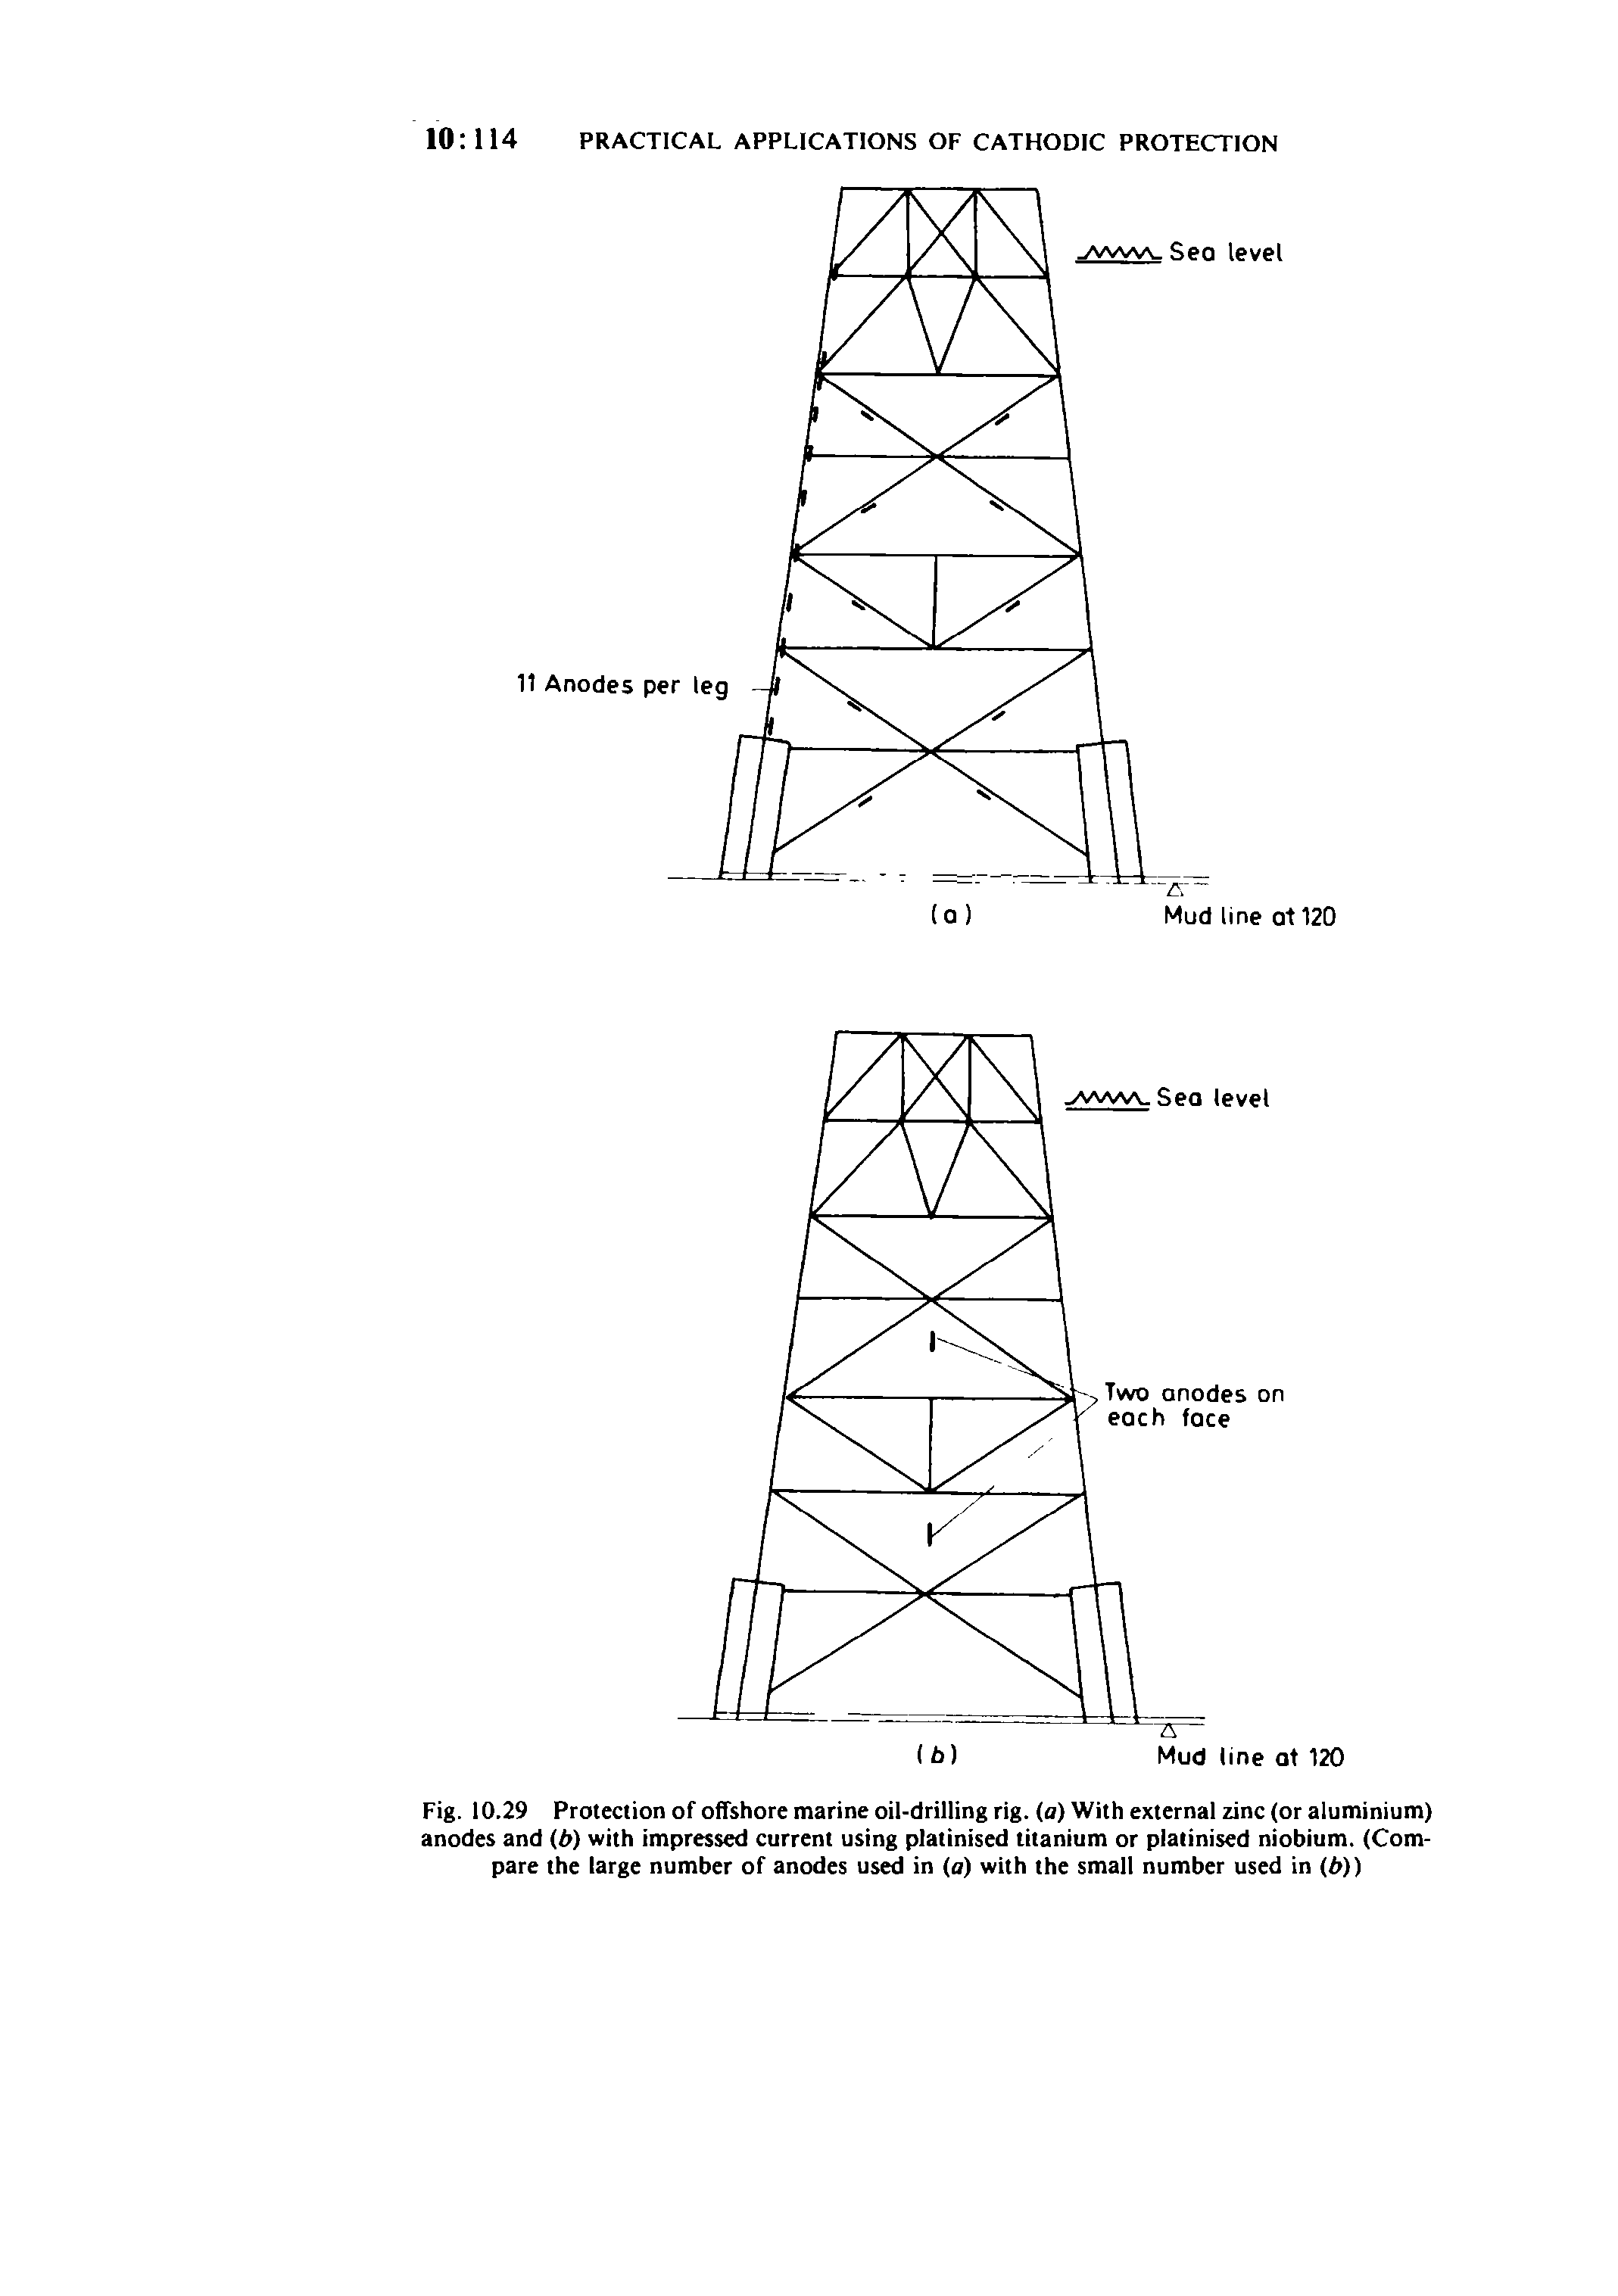 Fig. 10.29 Protection of offshore marine oil-drilling rig. (o) With external zinc (or aluminium) anodes and (b) with impressed current using platinised titanium or platinised niobium. (Compare the large number of anodes used in (a) with the small number used in (b))...